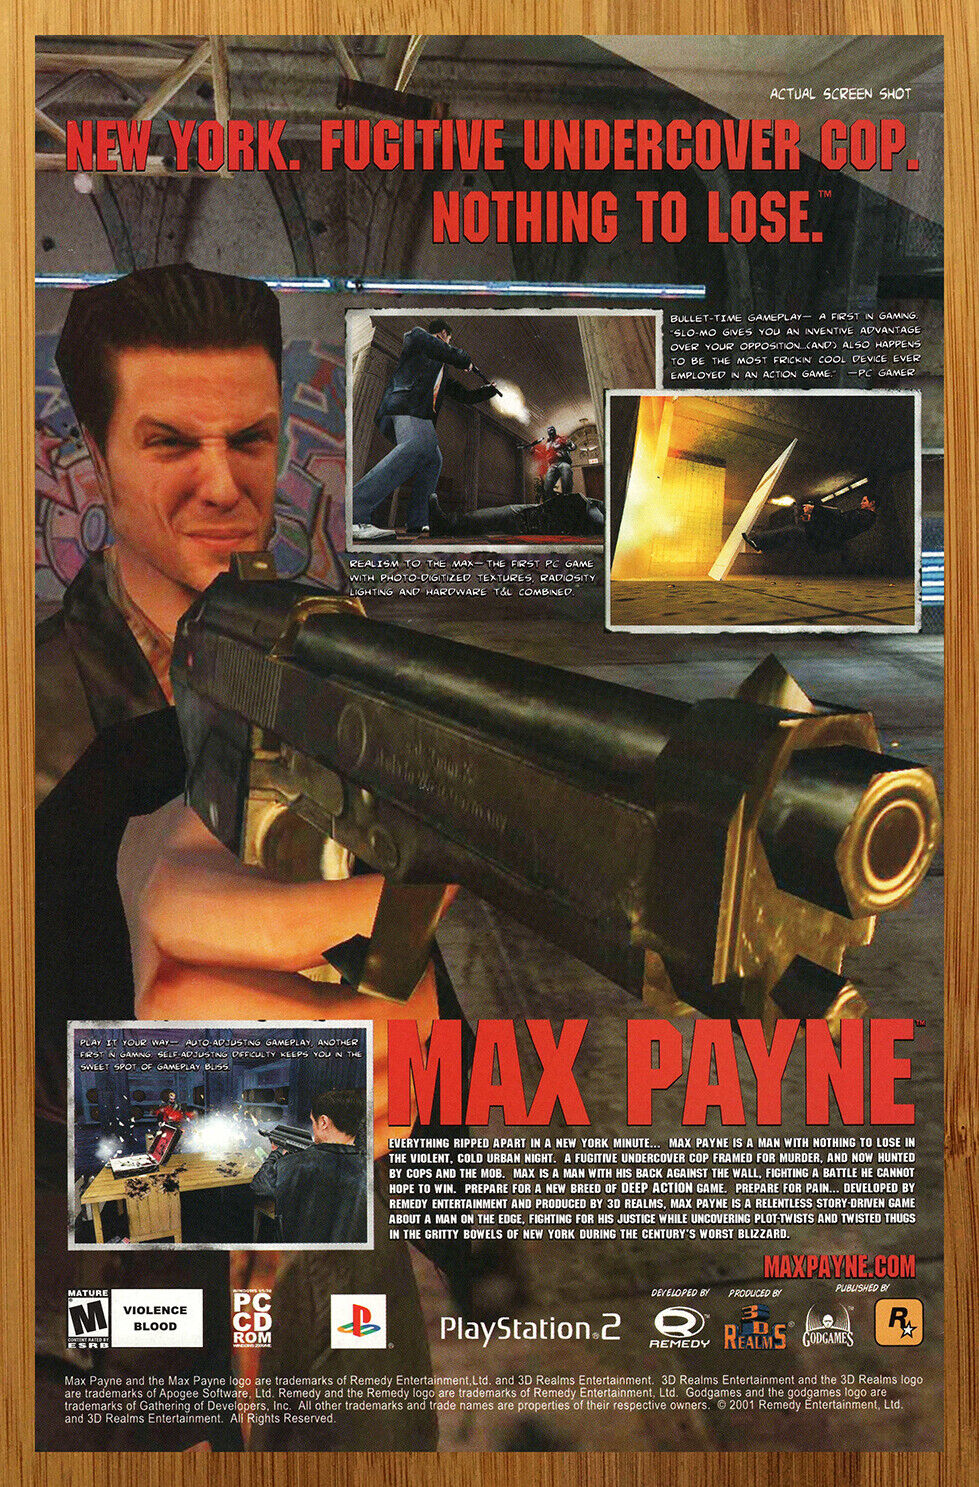 2001 Max Payne PC PS2 Xbox Vintage Print Ad/Poster Authentic Official Promo Art